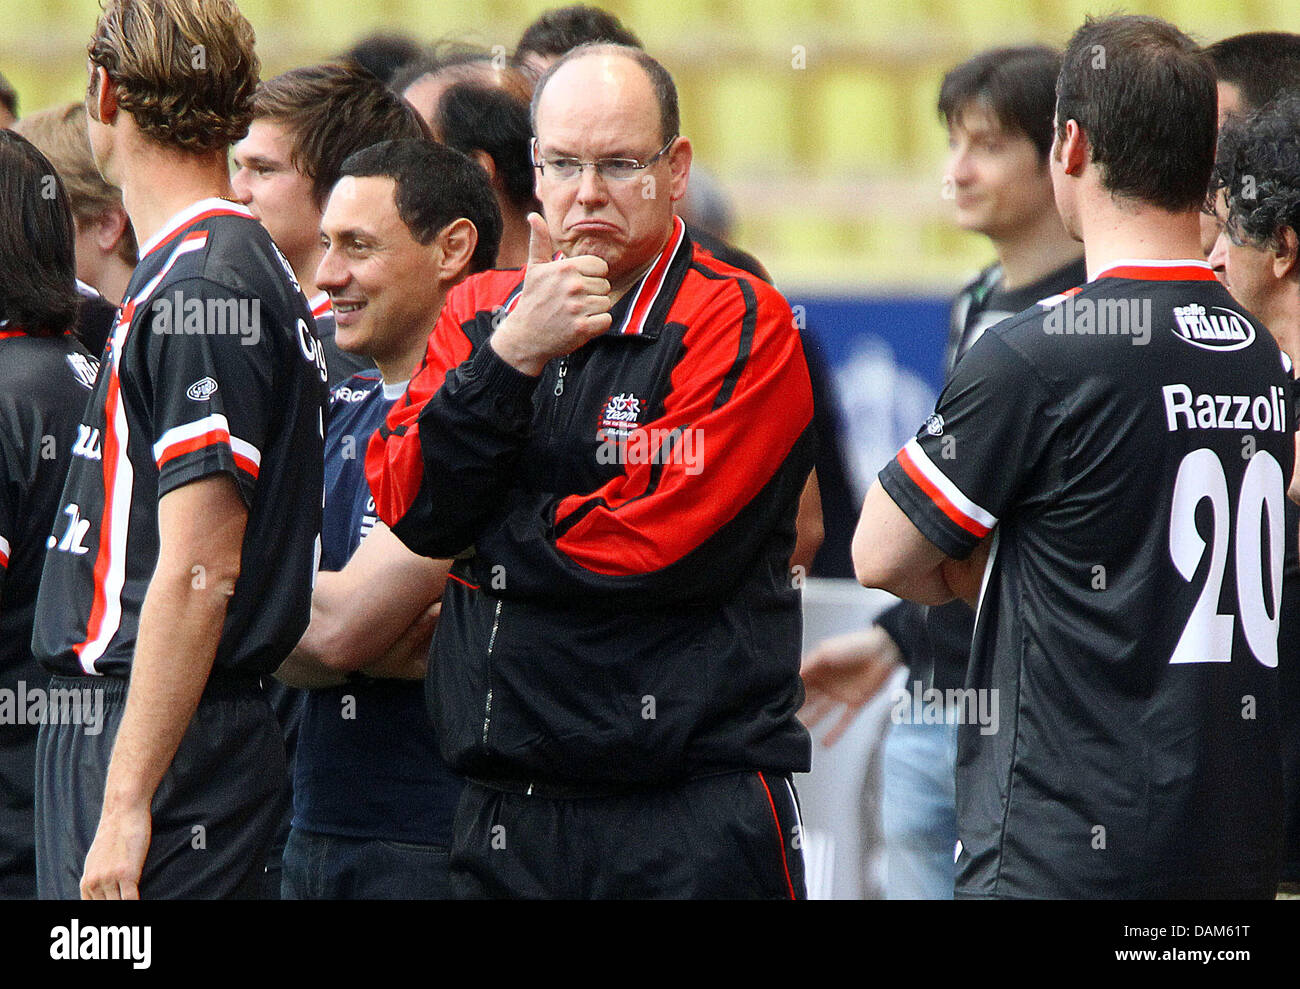 Prince Albert II of Monaco (C) during a charity football match between racing drivers and celebrities prior to the Formula One Grand Prix of Monaco in Monte Carlo, Monaco, 24 May 2011. The Grand Prix will take place on 29 May. Photo: Jens Buettner dpa Stock Photo